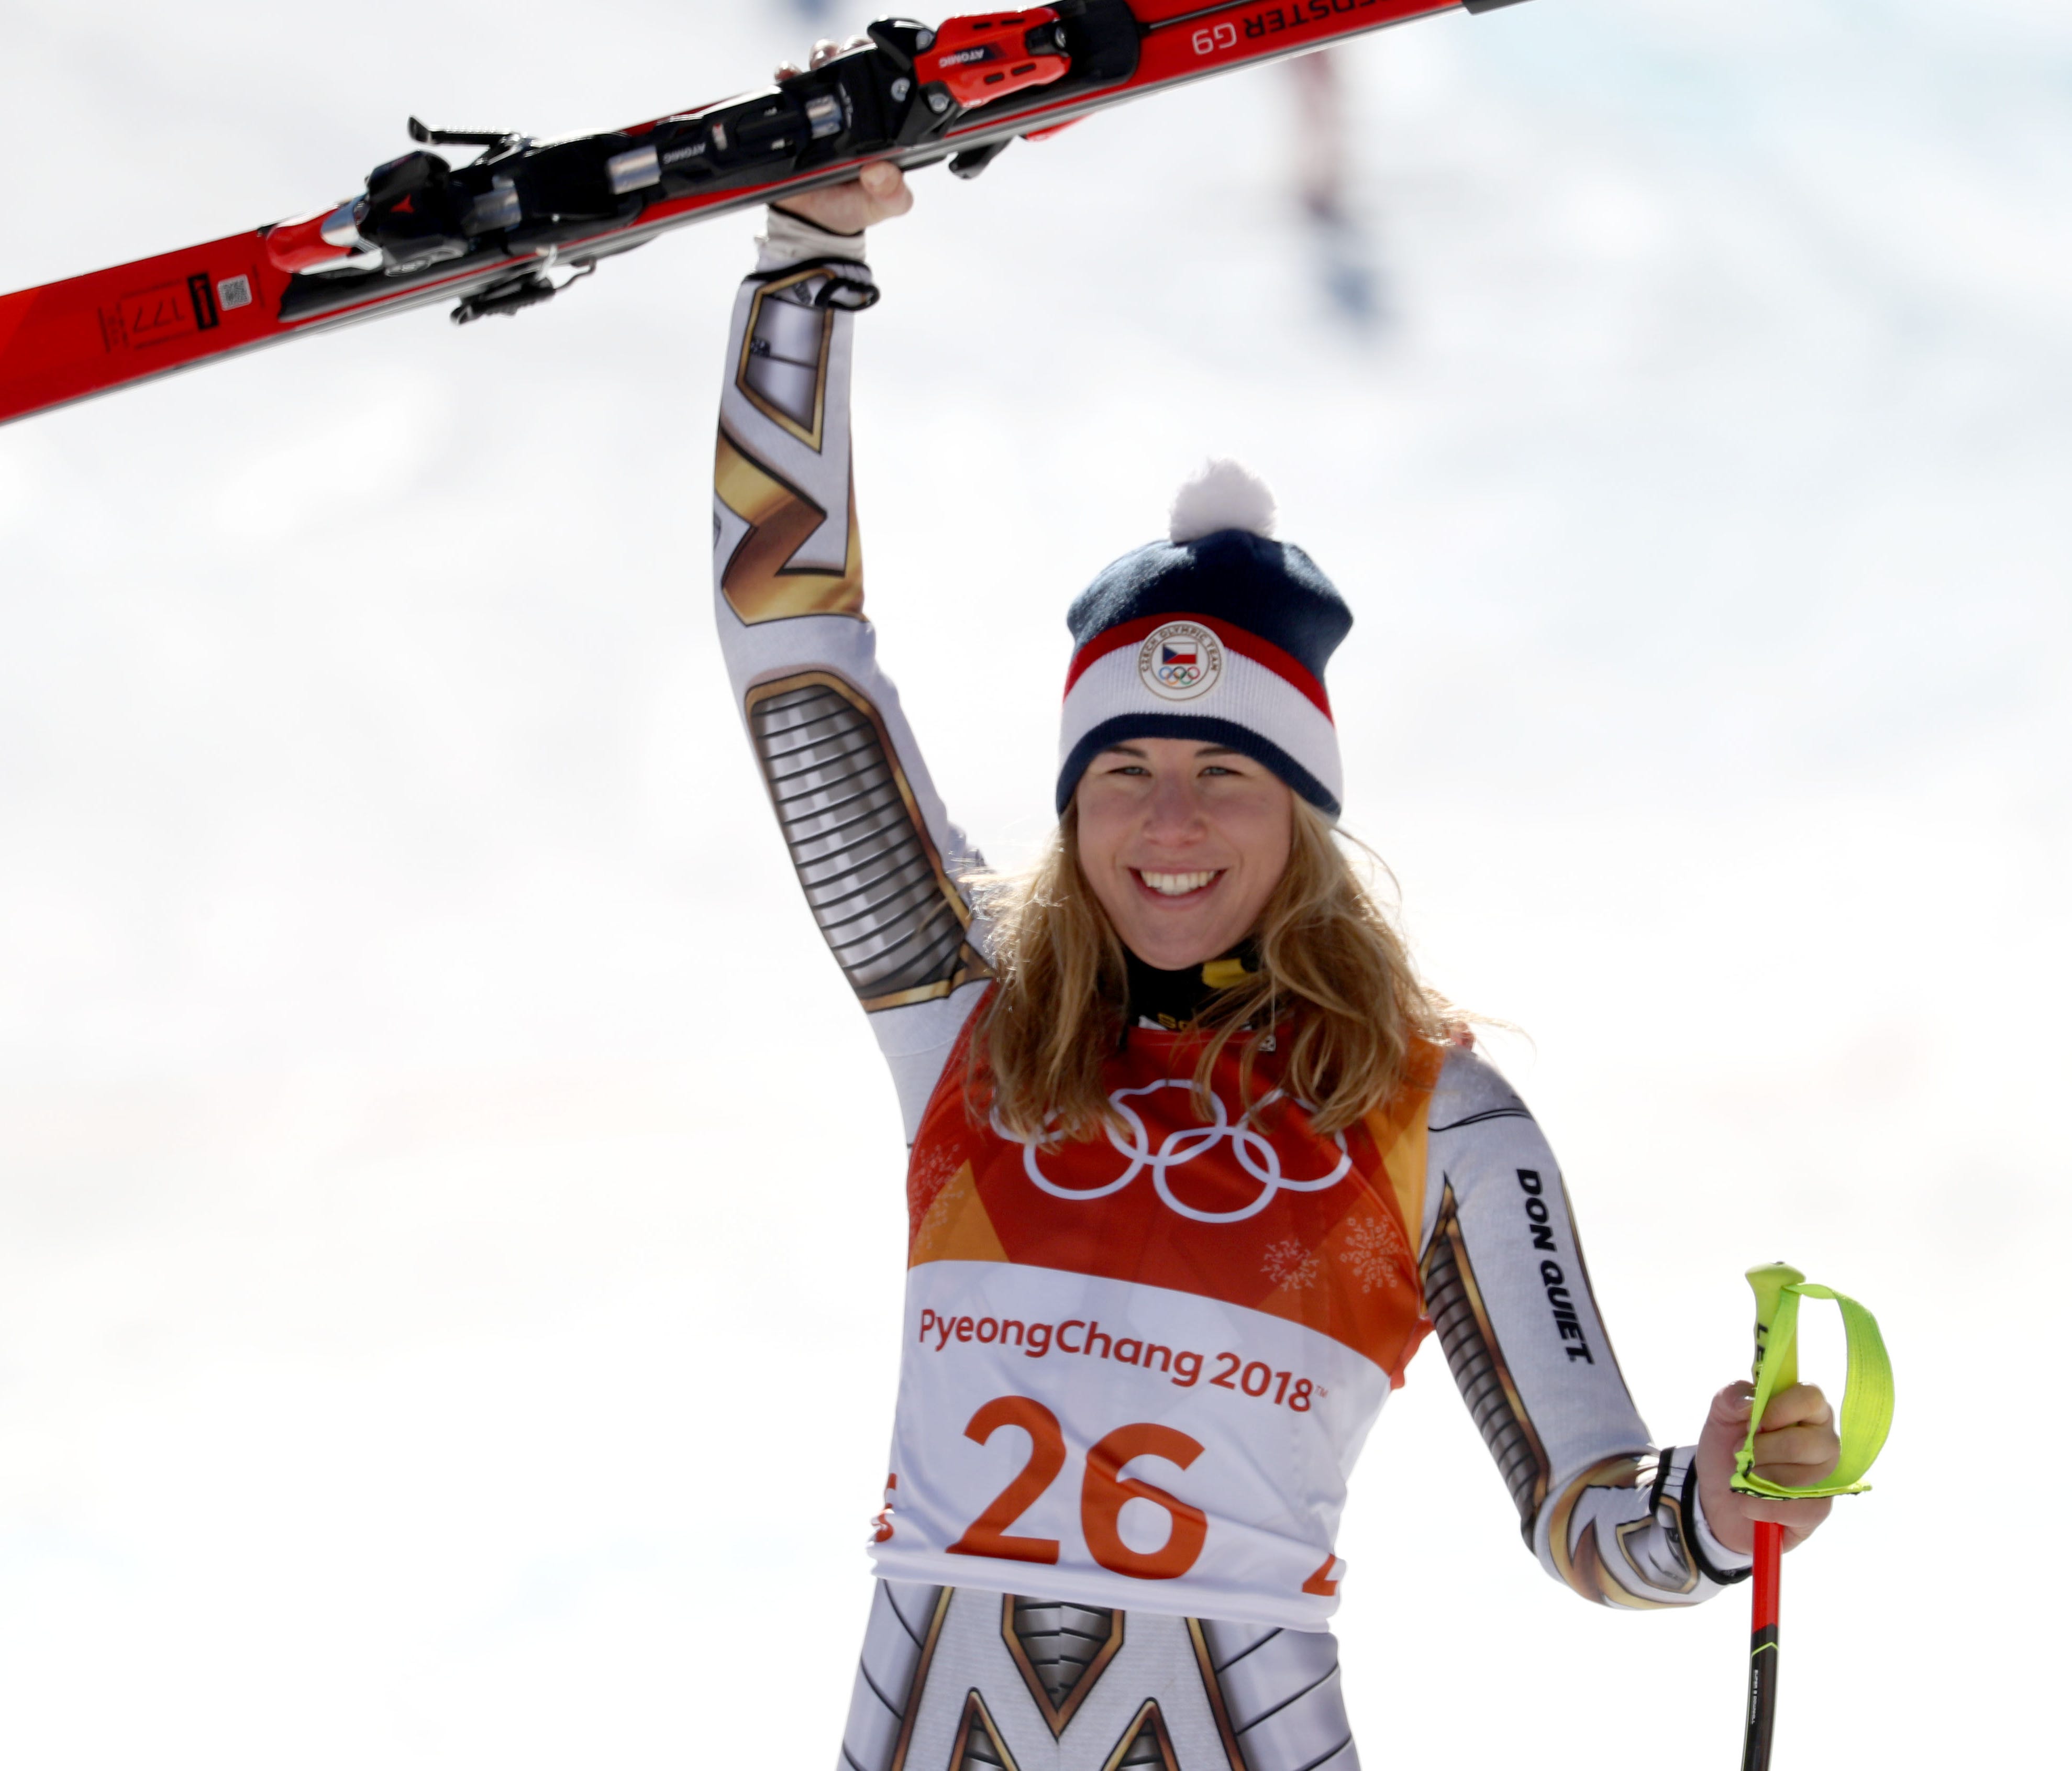 Feb 17, 2018; Pyeongchang, South Korea; Gold medal winner Ester Ledecka (CZE) reacts after competing in the alpine skiing Super-G event during the Pyeongchang 2018 Olympic Winter Games at Jeongseon Alpine Centre. Mandatory Credit: Jeff Swinger-USA TO